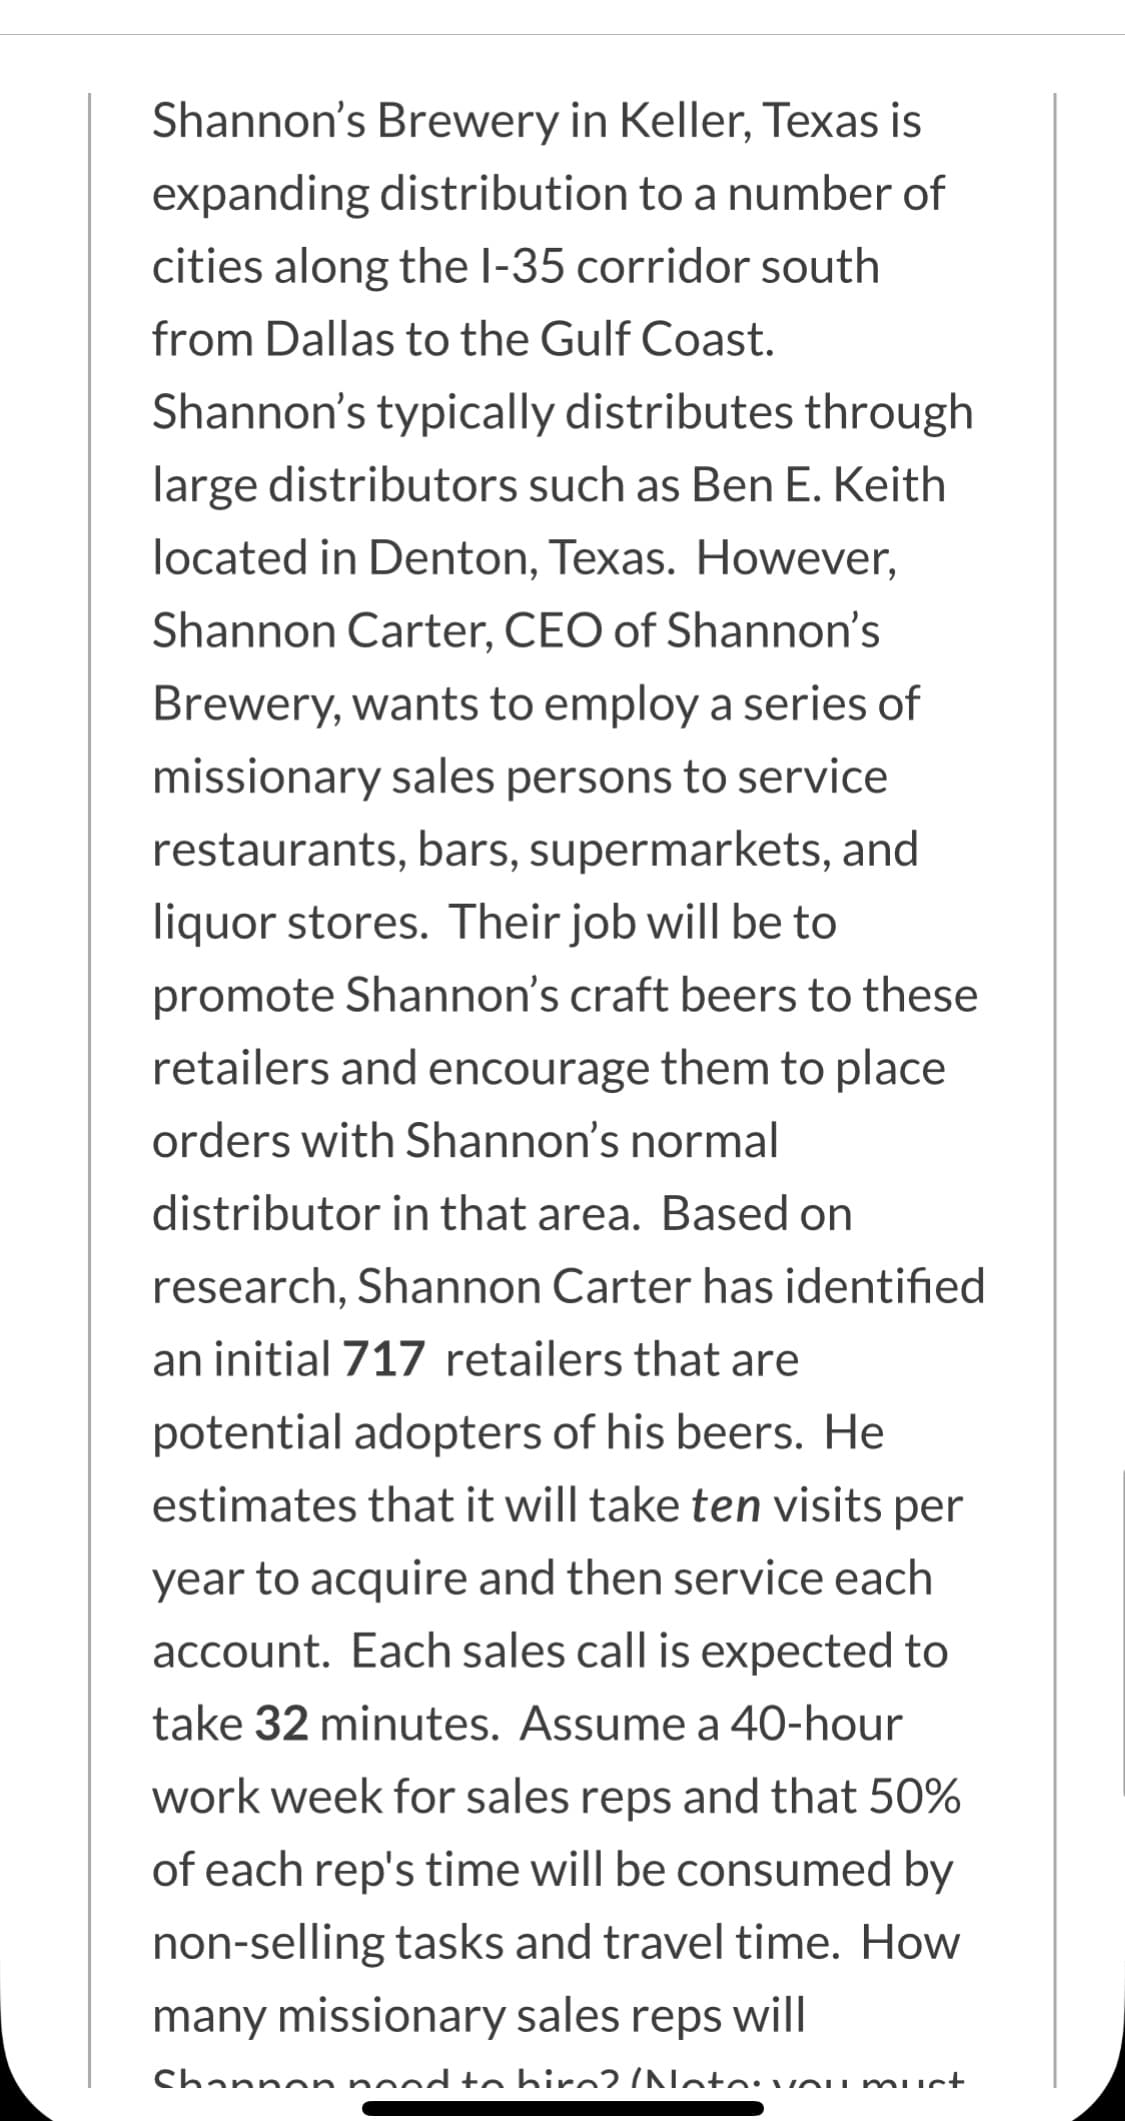 Shannon's Brewery in Keller, Texas is
expanding distribution to a number of
cities along the l-35 corridor south
from Dallas to the Gulf Coast.
Shannon's typically distributes through
large distributors such as Ben E. Keith
located in Denton, Texas. However,
Shannon Carter, CEO of Shannon's
Brewery, wants to employ a series of
missionary sales persons to service
restaurants, bars, supermarkets, and
liquor stores. Their job will be to
promote Shannon's craft beers to these
retailers and encourage them to place
orders with Shannon's normal
distributor in that area. Based on
research, Shannon Carter has identified
an initial 717 retailers that are
potential adopters of his beers. He
estimates that it will take ten visits per
year to acquire and then service each
account. Each sales call is expected to
take 32 minutes. Assume a 40-hour
work week for sales reps and that 50%
of each rep's time will be consumed by
non-selling tasks and travel time. How
many missionary sales reps will
Channon nod to hirn? /Notovou muct
